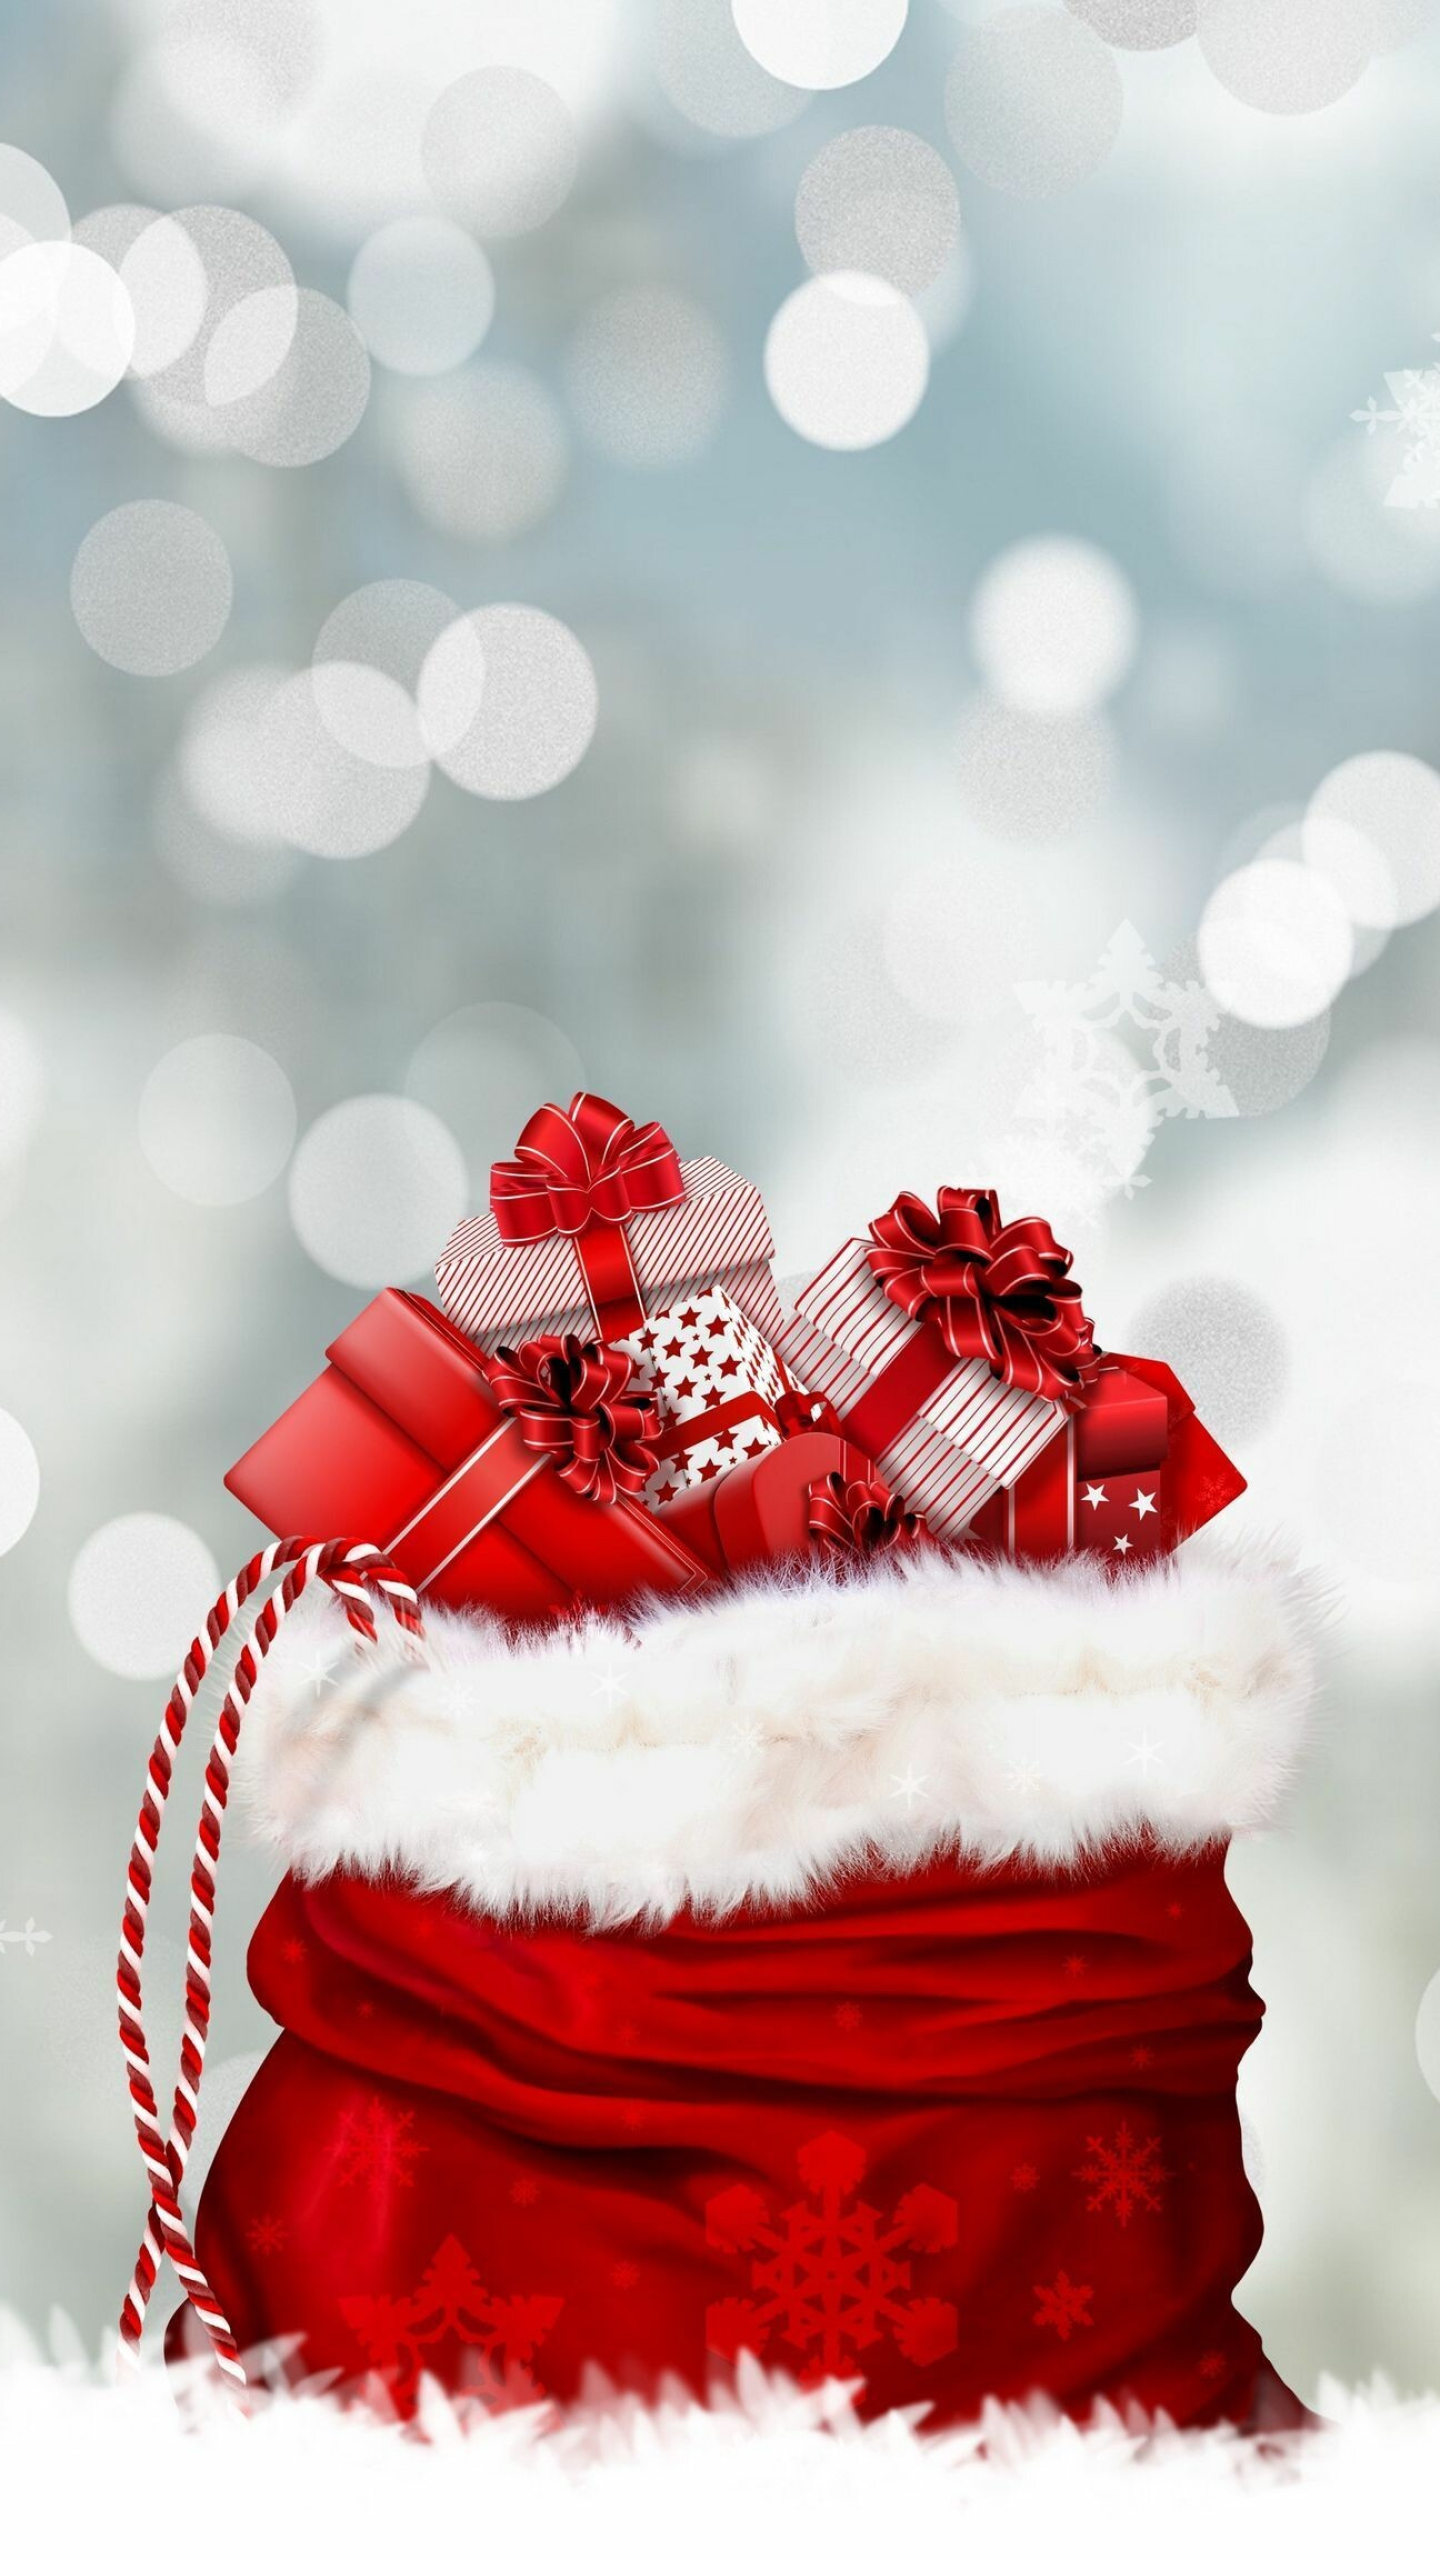 Christmas Gifts: An item given to someone without the expectation of payment on holidays. 1440x2560 HD Wallpaper.